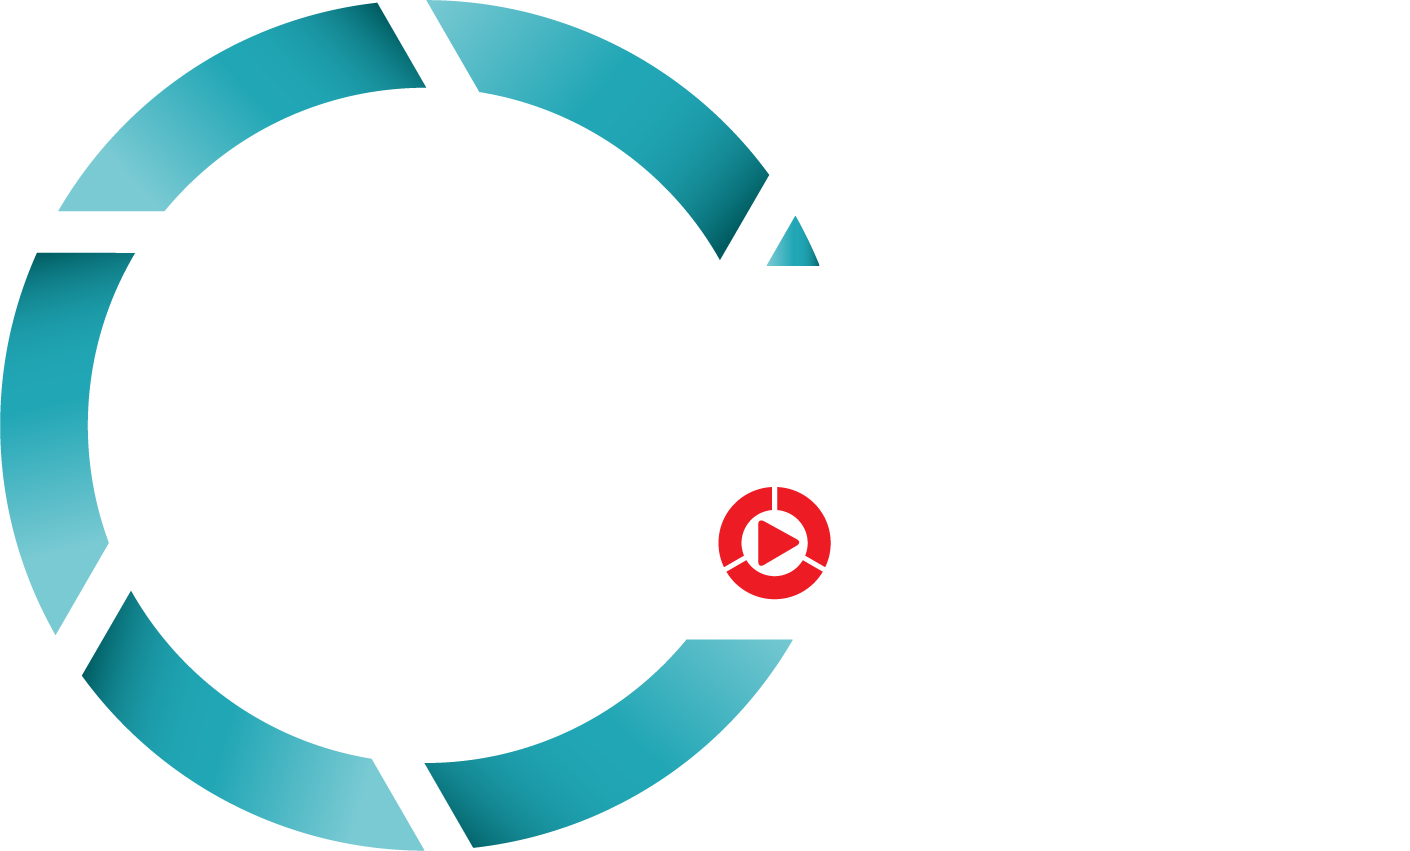 The Photography & Video Show logo